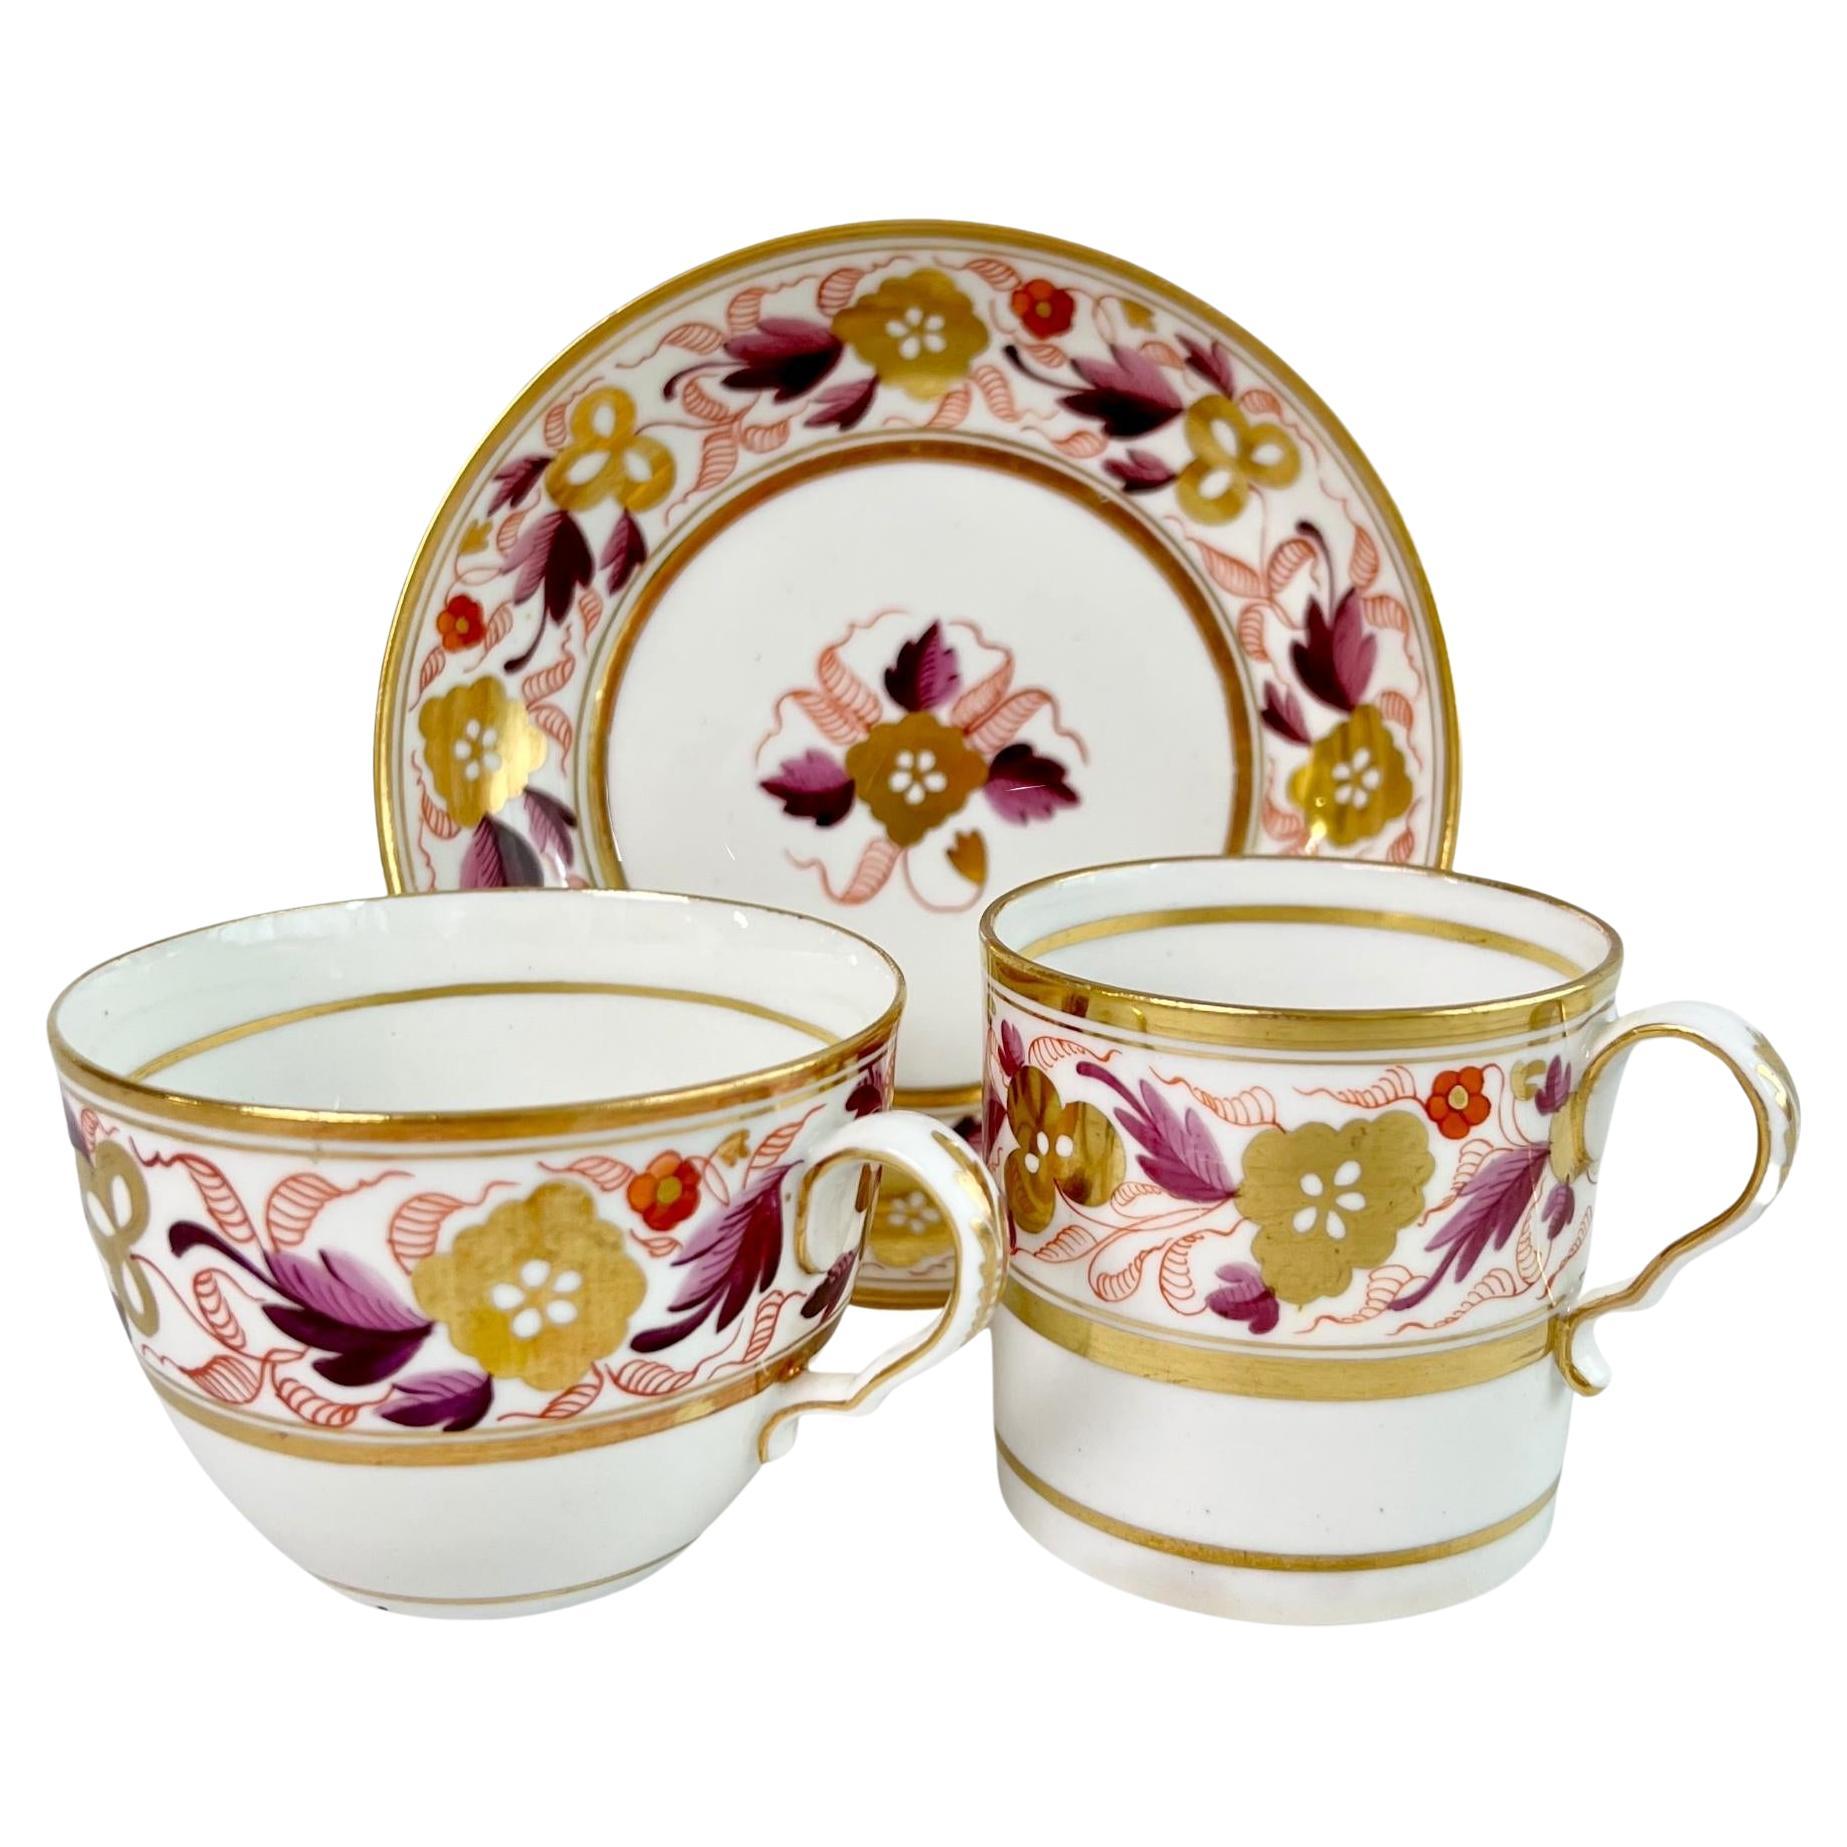 Spode Porcelain Teacup Trio, Puce and Gilt Floral Pattern, Neoclassical ca 1810